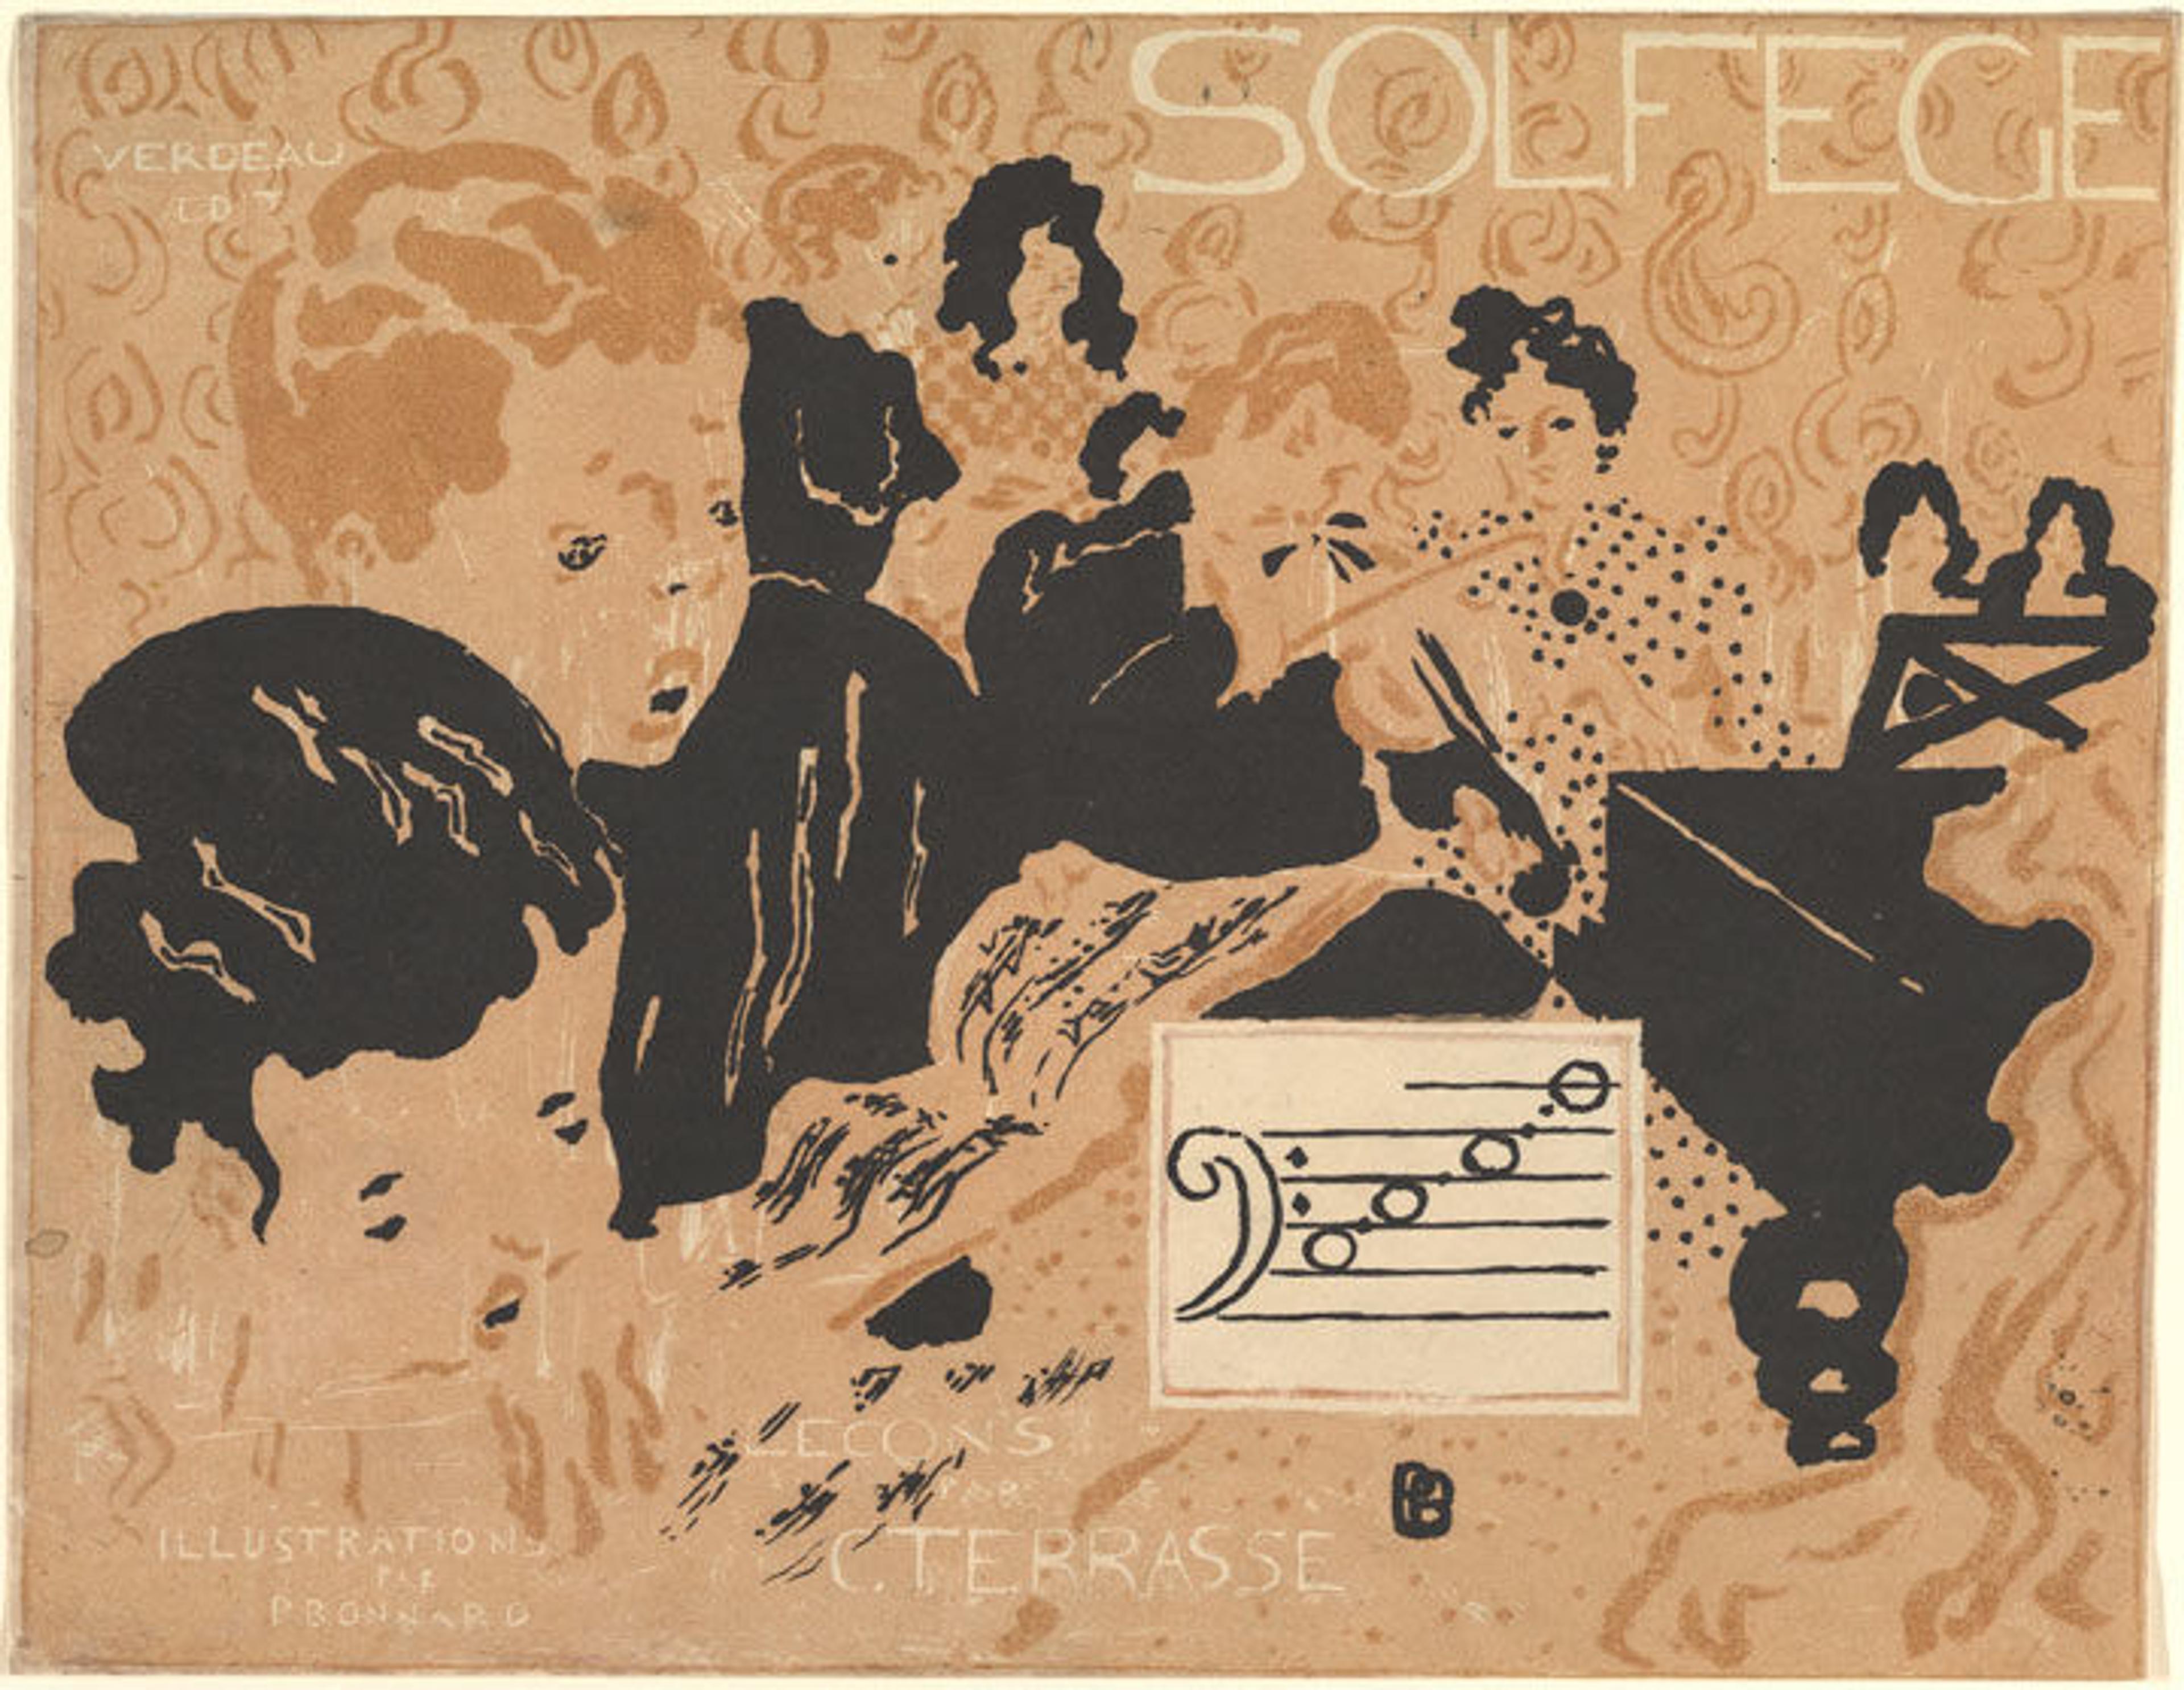 Color lithograph depicting a group of young music students, a piano, and some sheet music